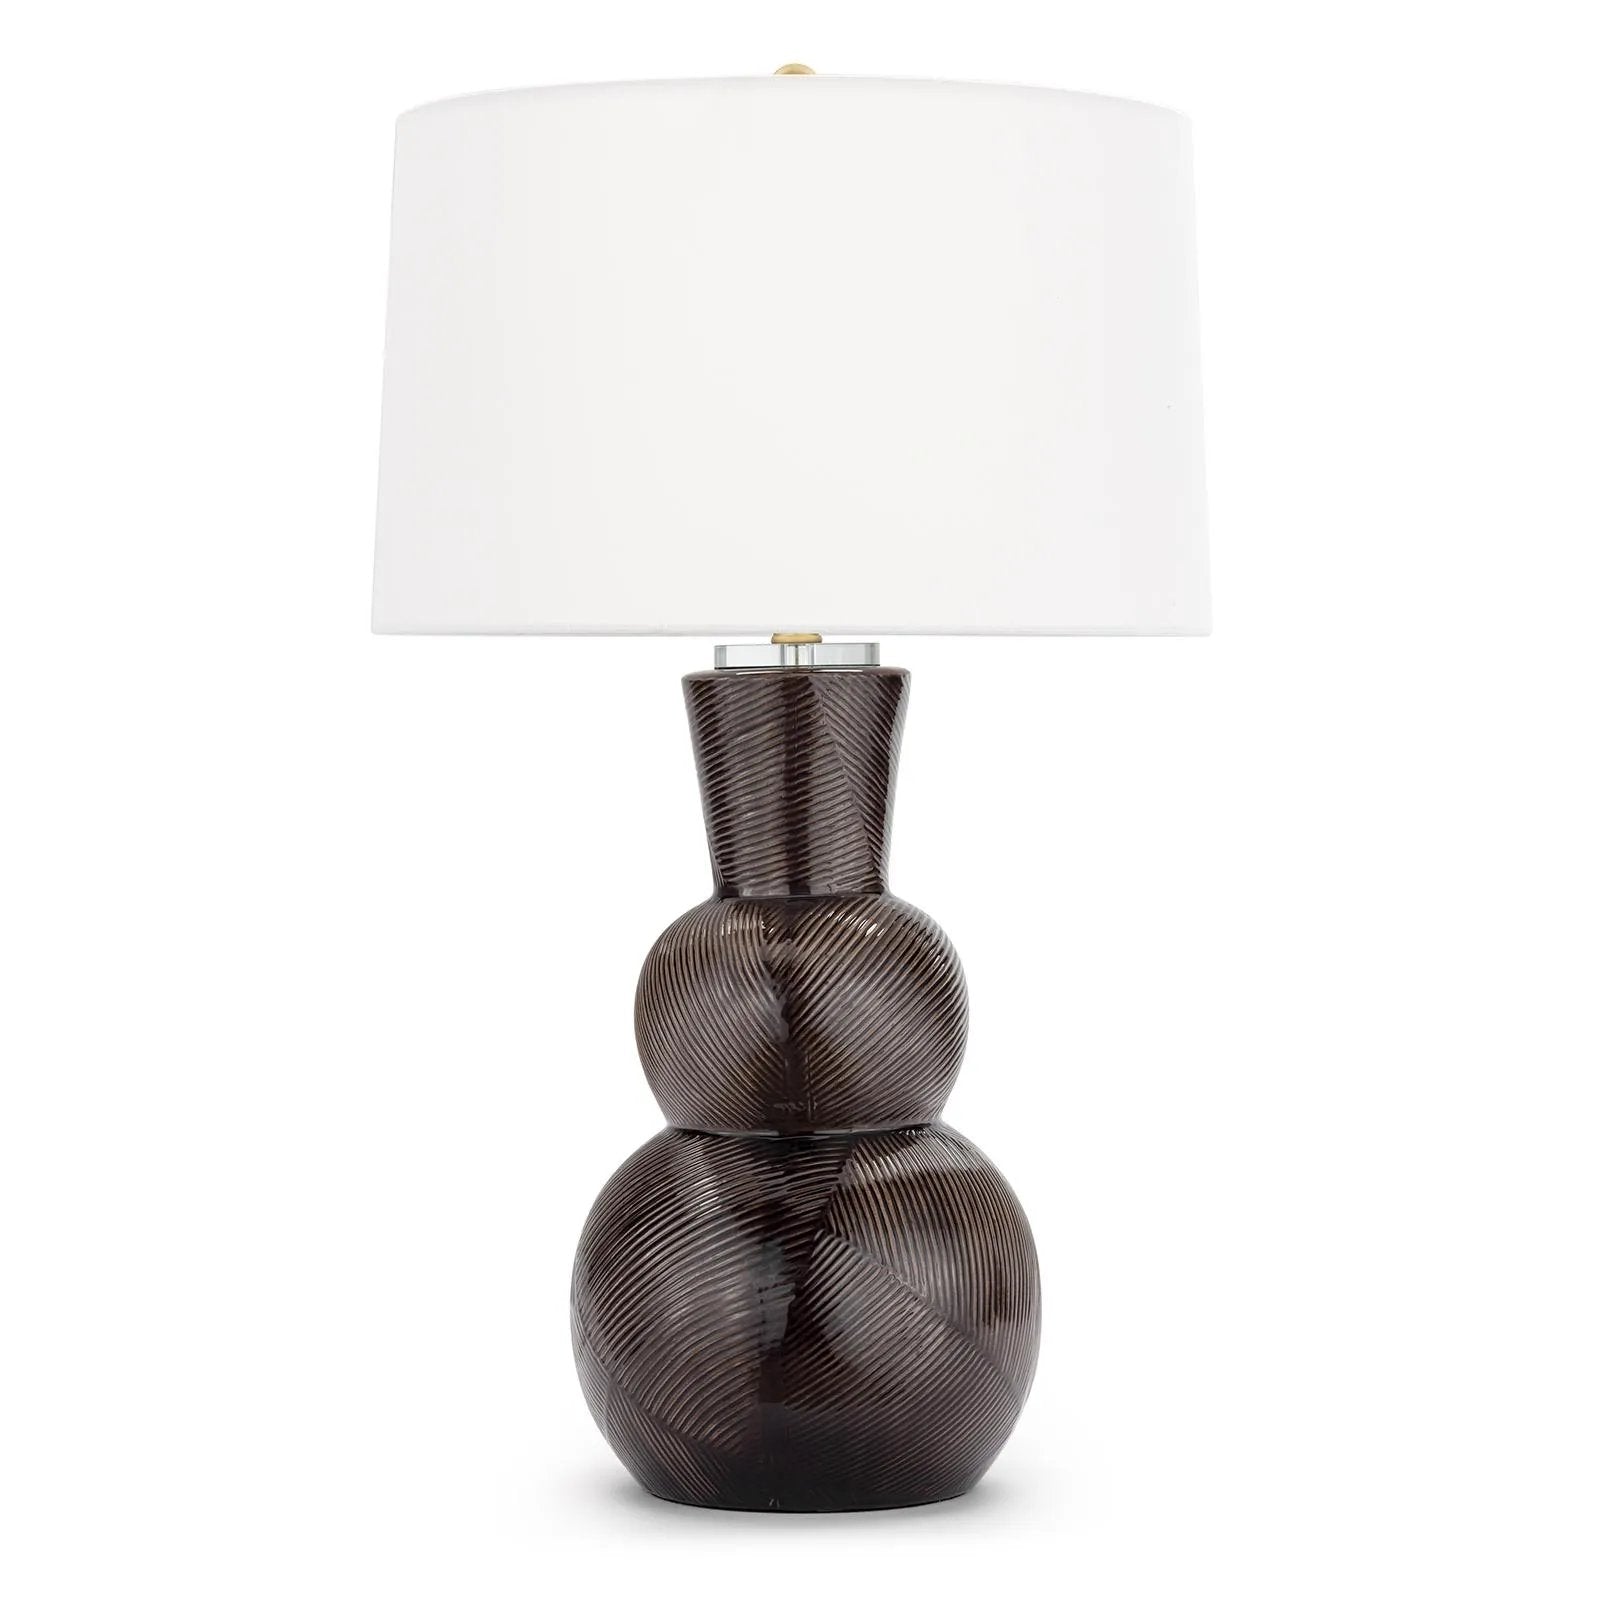 With its alluring silhouette, the Hugo ceramic table lamp brings contemporary appeal and modern contrast to interiors. Employing a specialized glazing technique, master artisans hand-shape earthenware to produce a luxurious finish for subtle highs and lows that shift with the light source above. Amethyst Home provides interior design, new home construction design consulting, vintage area rugs, and lighting in the Seattle metro area.